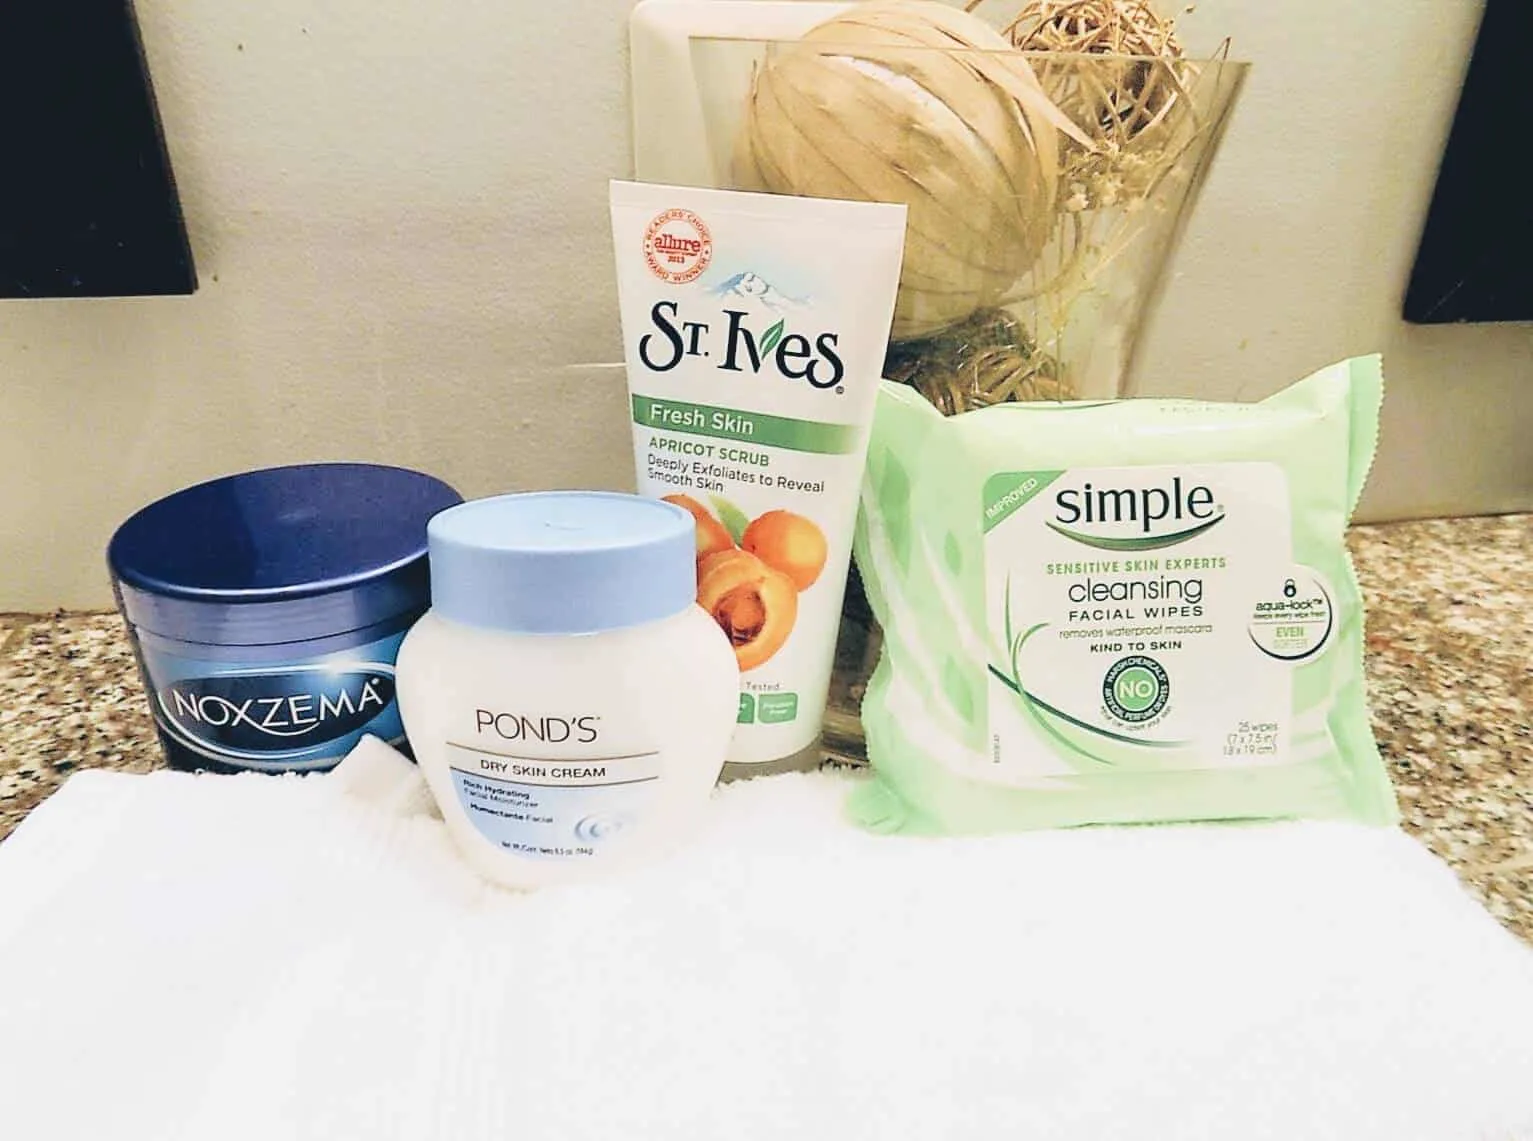 Skin care items to sneak pampering into mom\'s busy schedule.